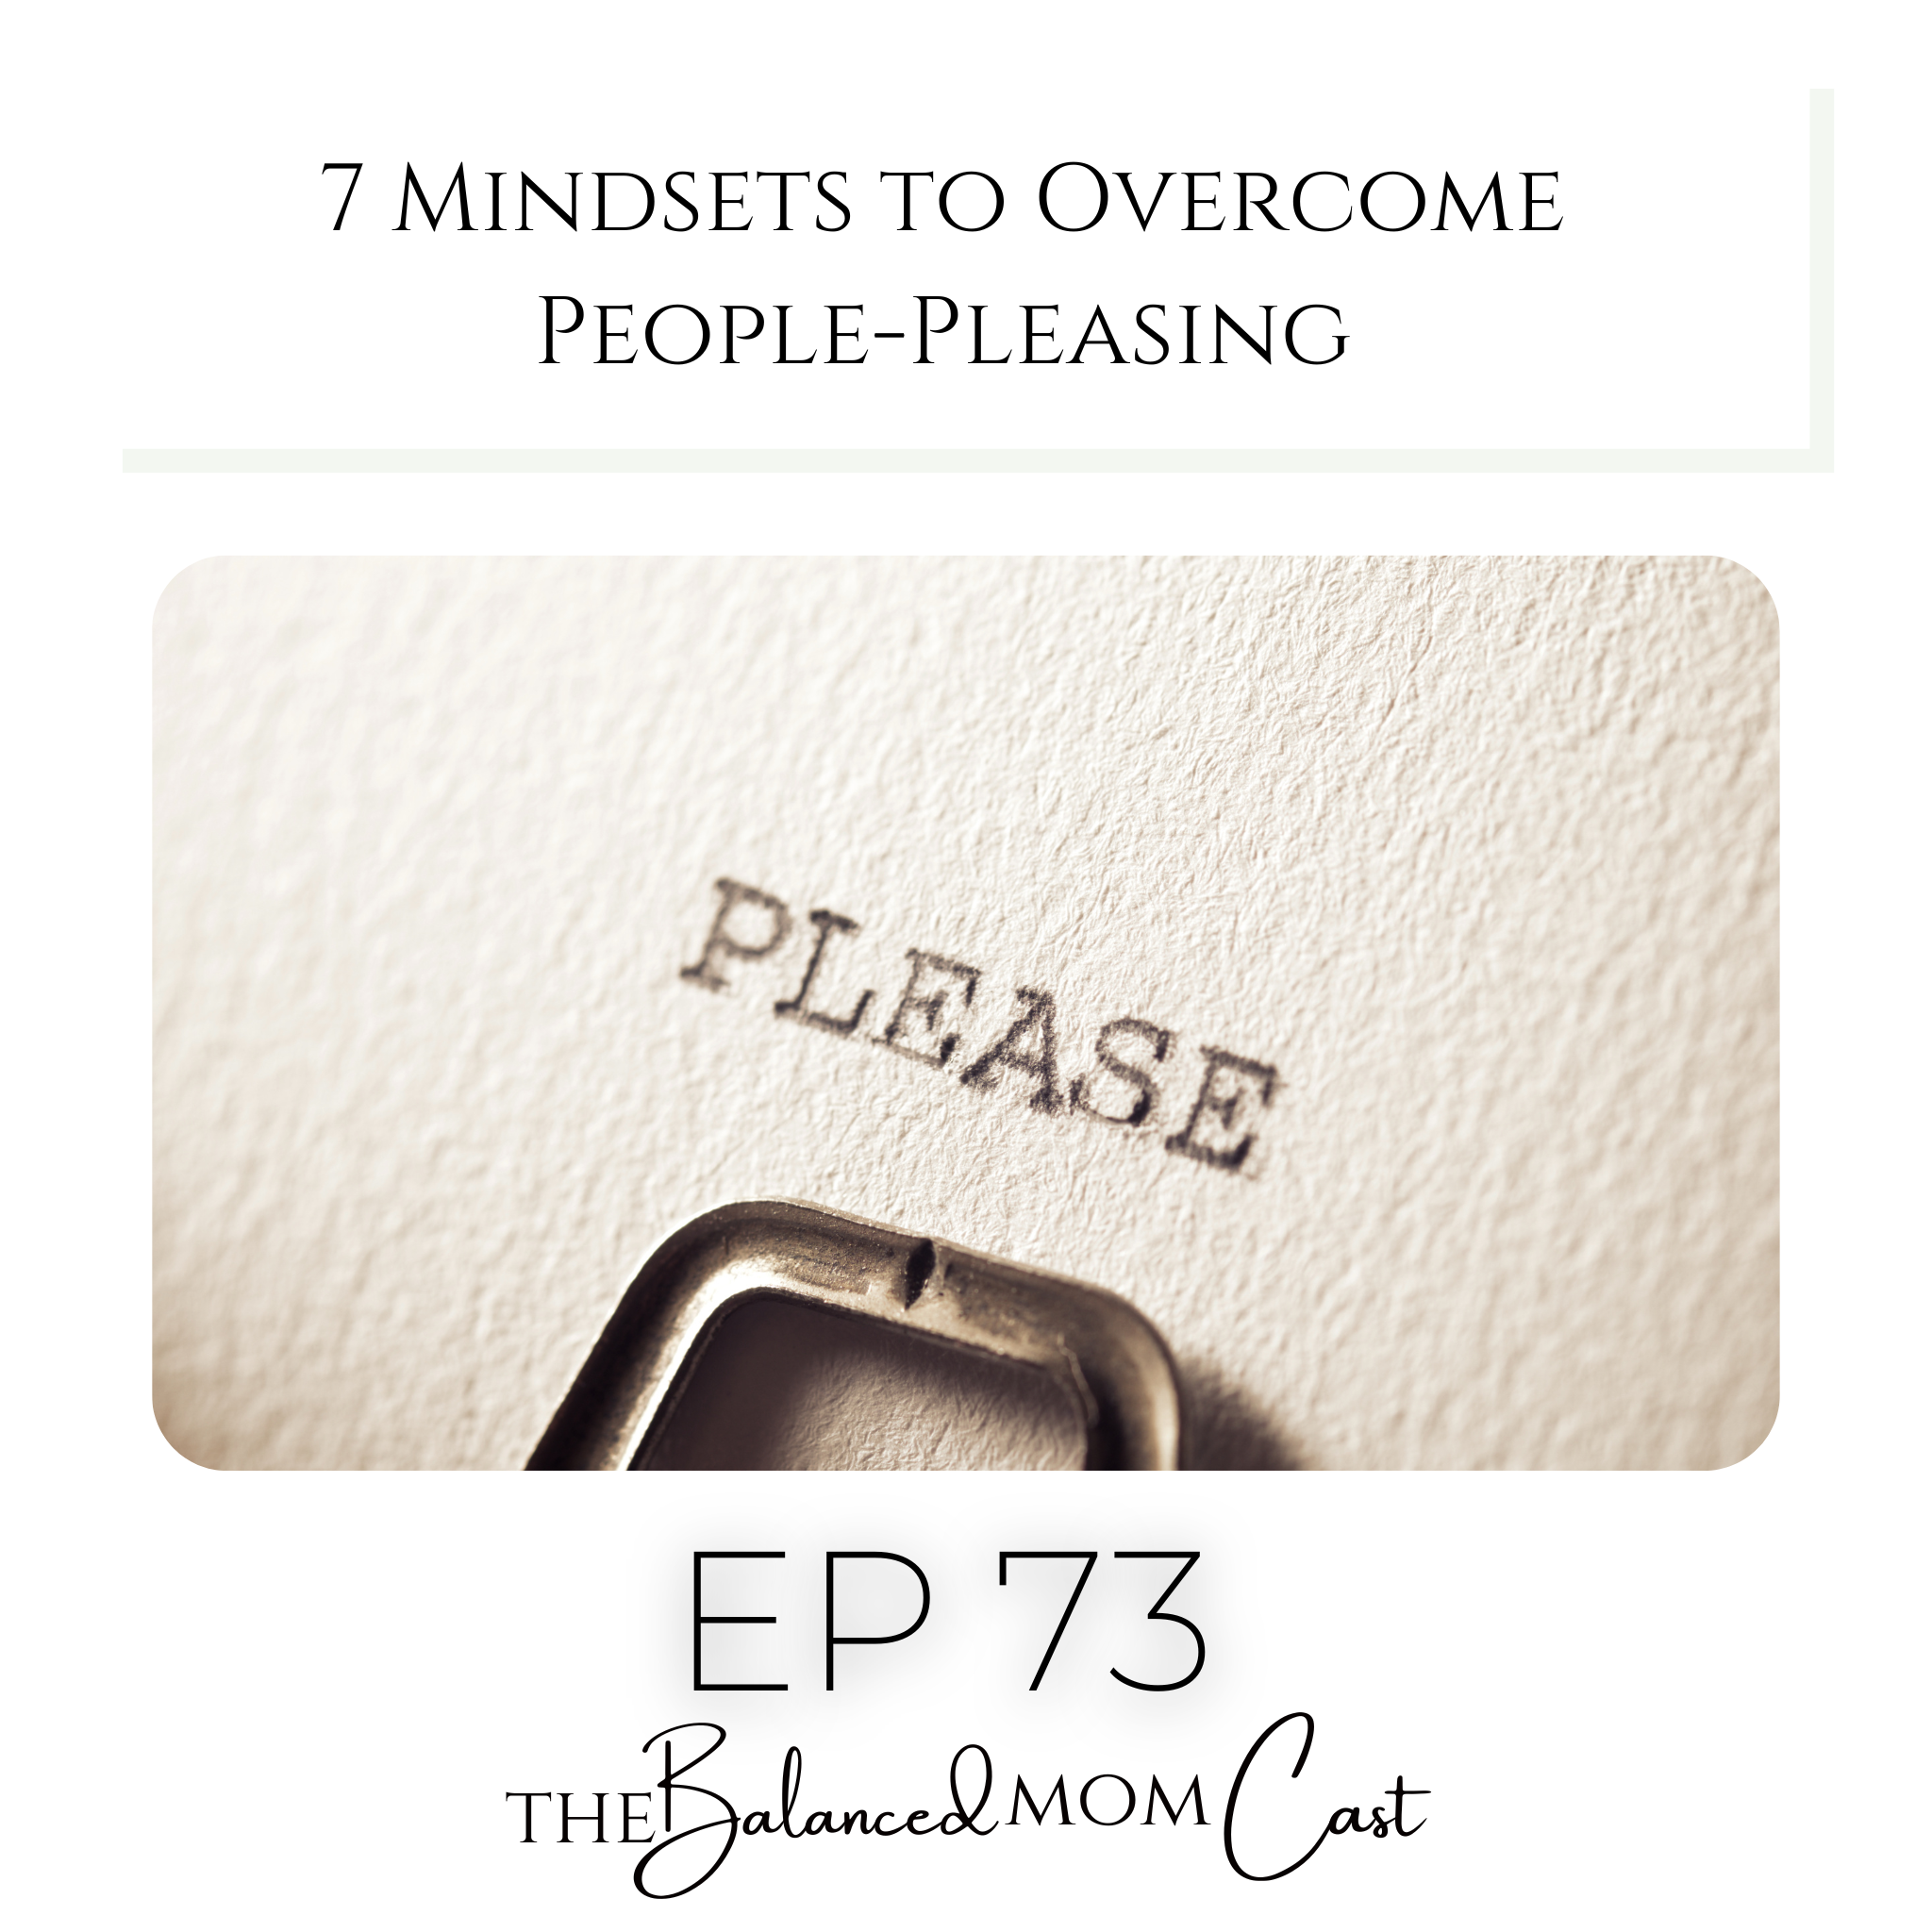 Ep 73: 7 Mindsets to Overcome People-Pleasing